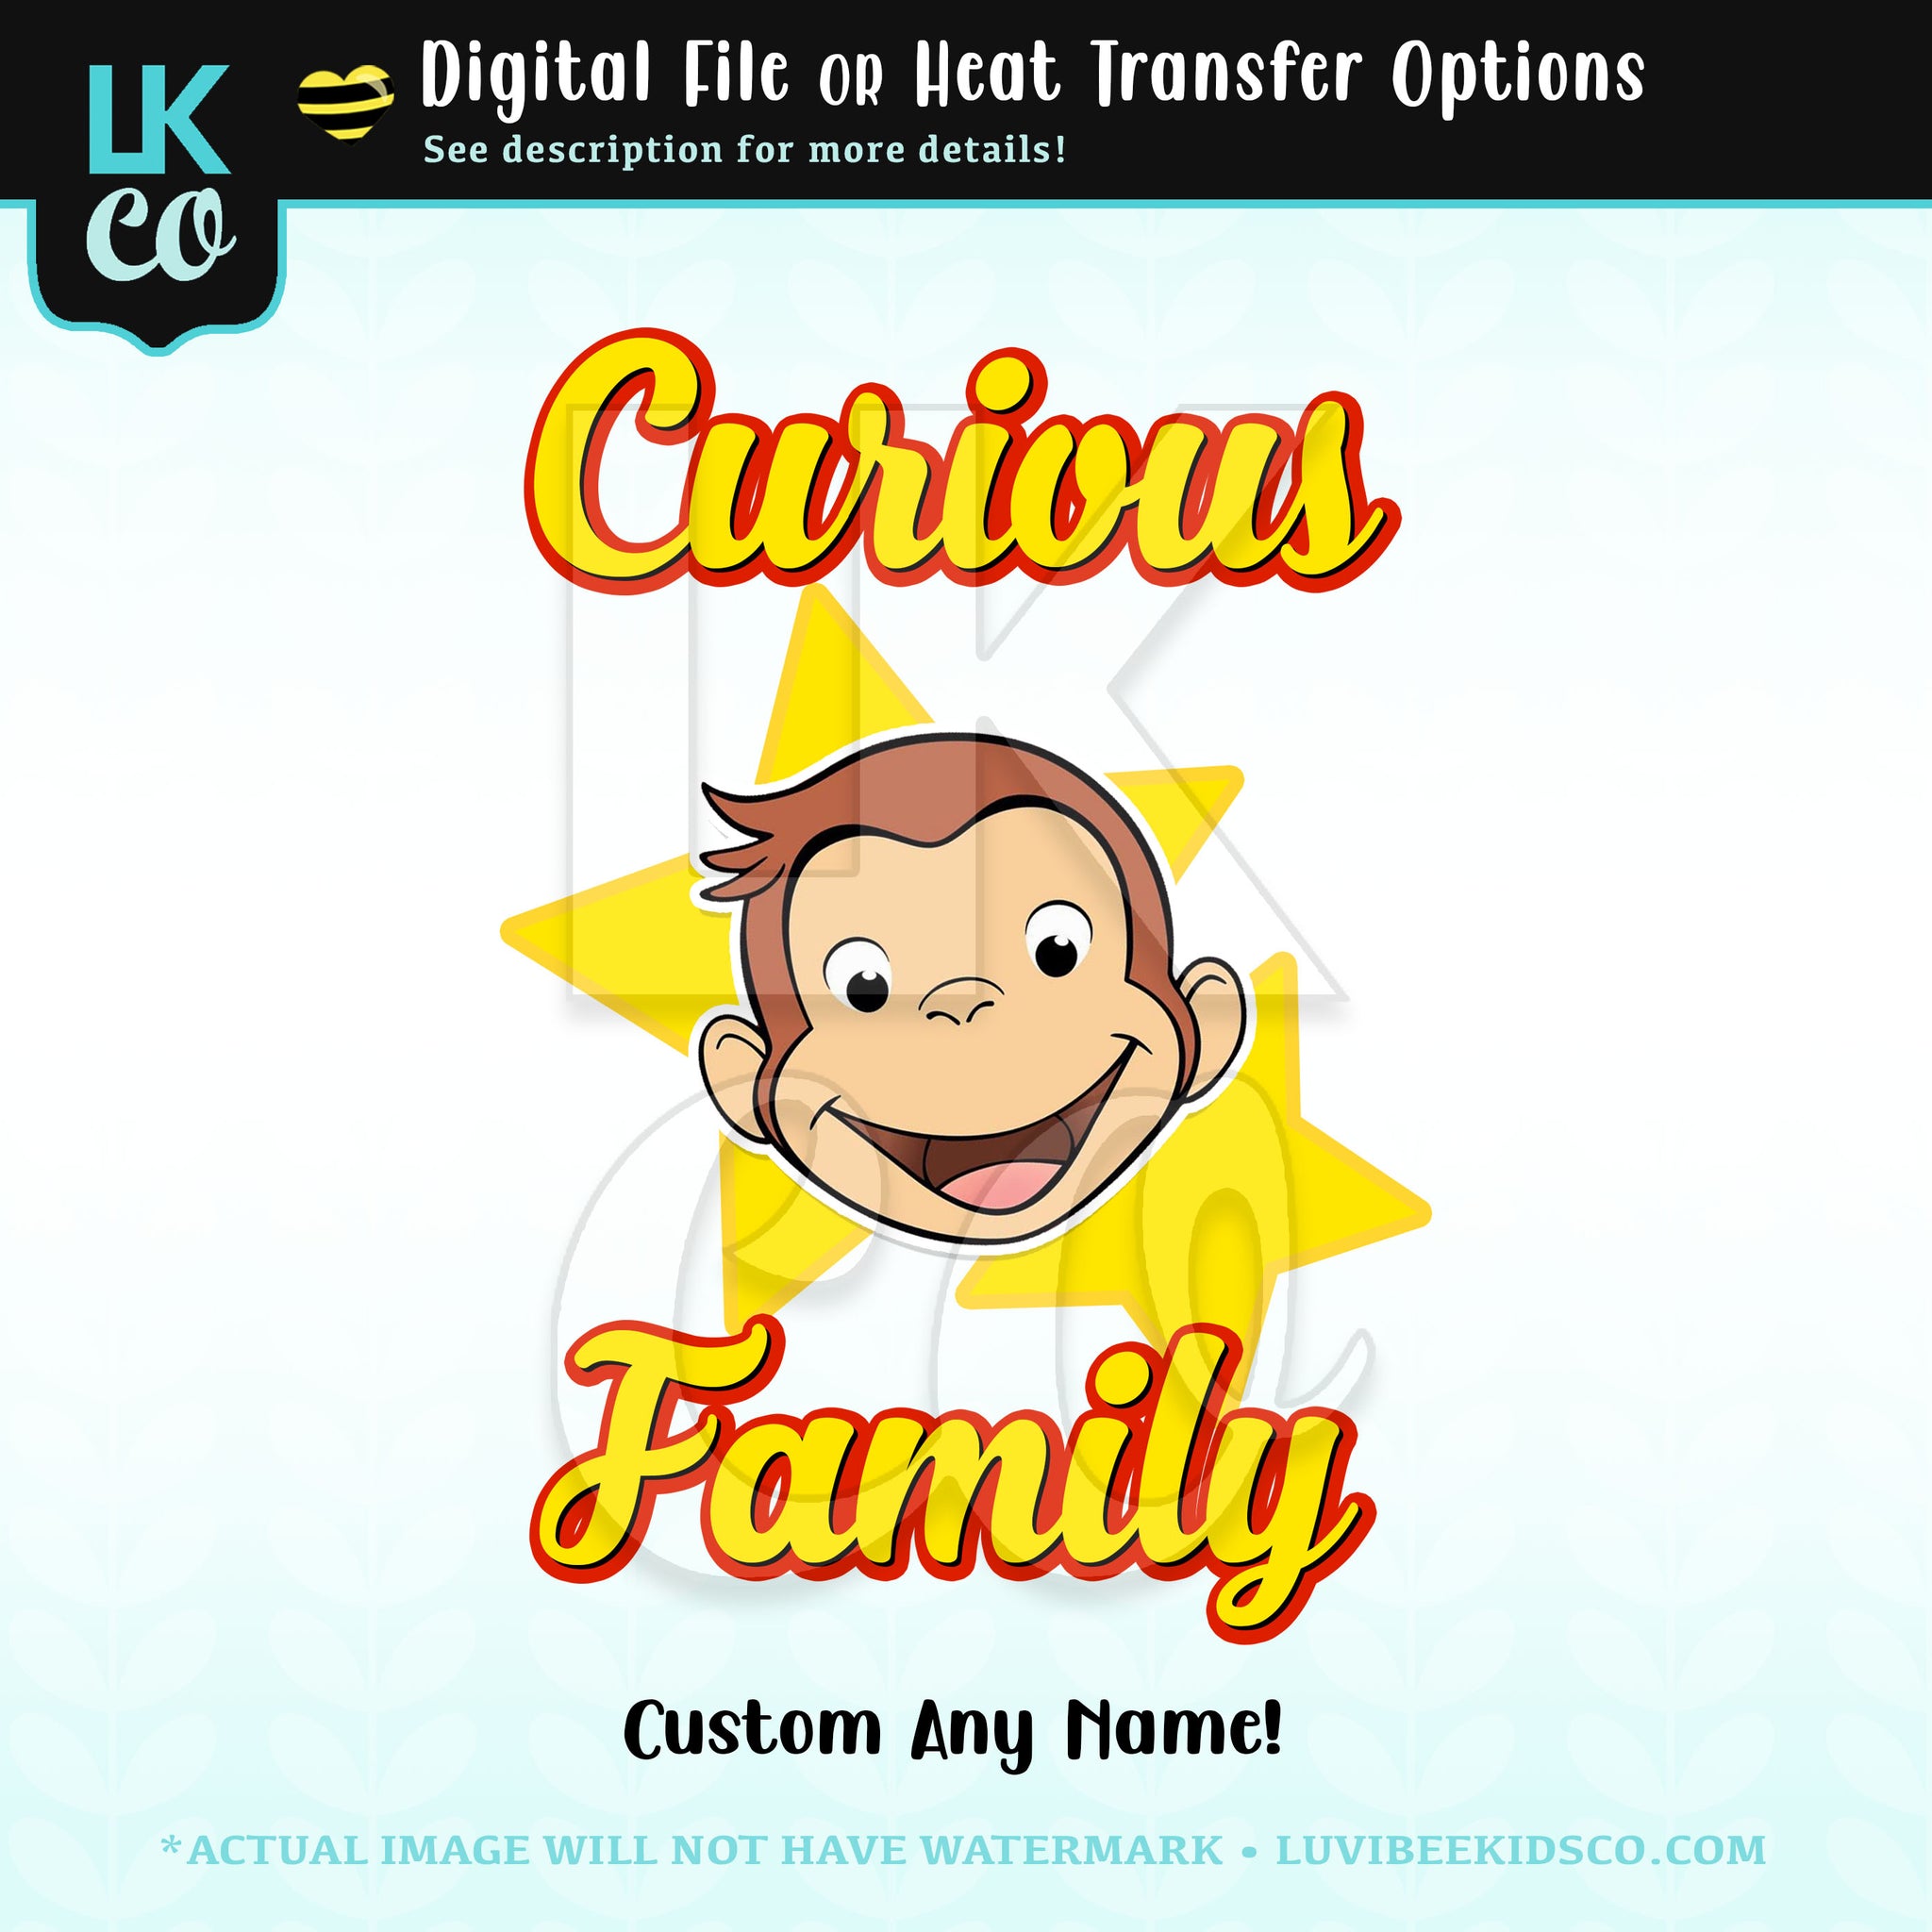 Curious George Birthday Designs - Add Family Members - Stars